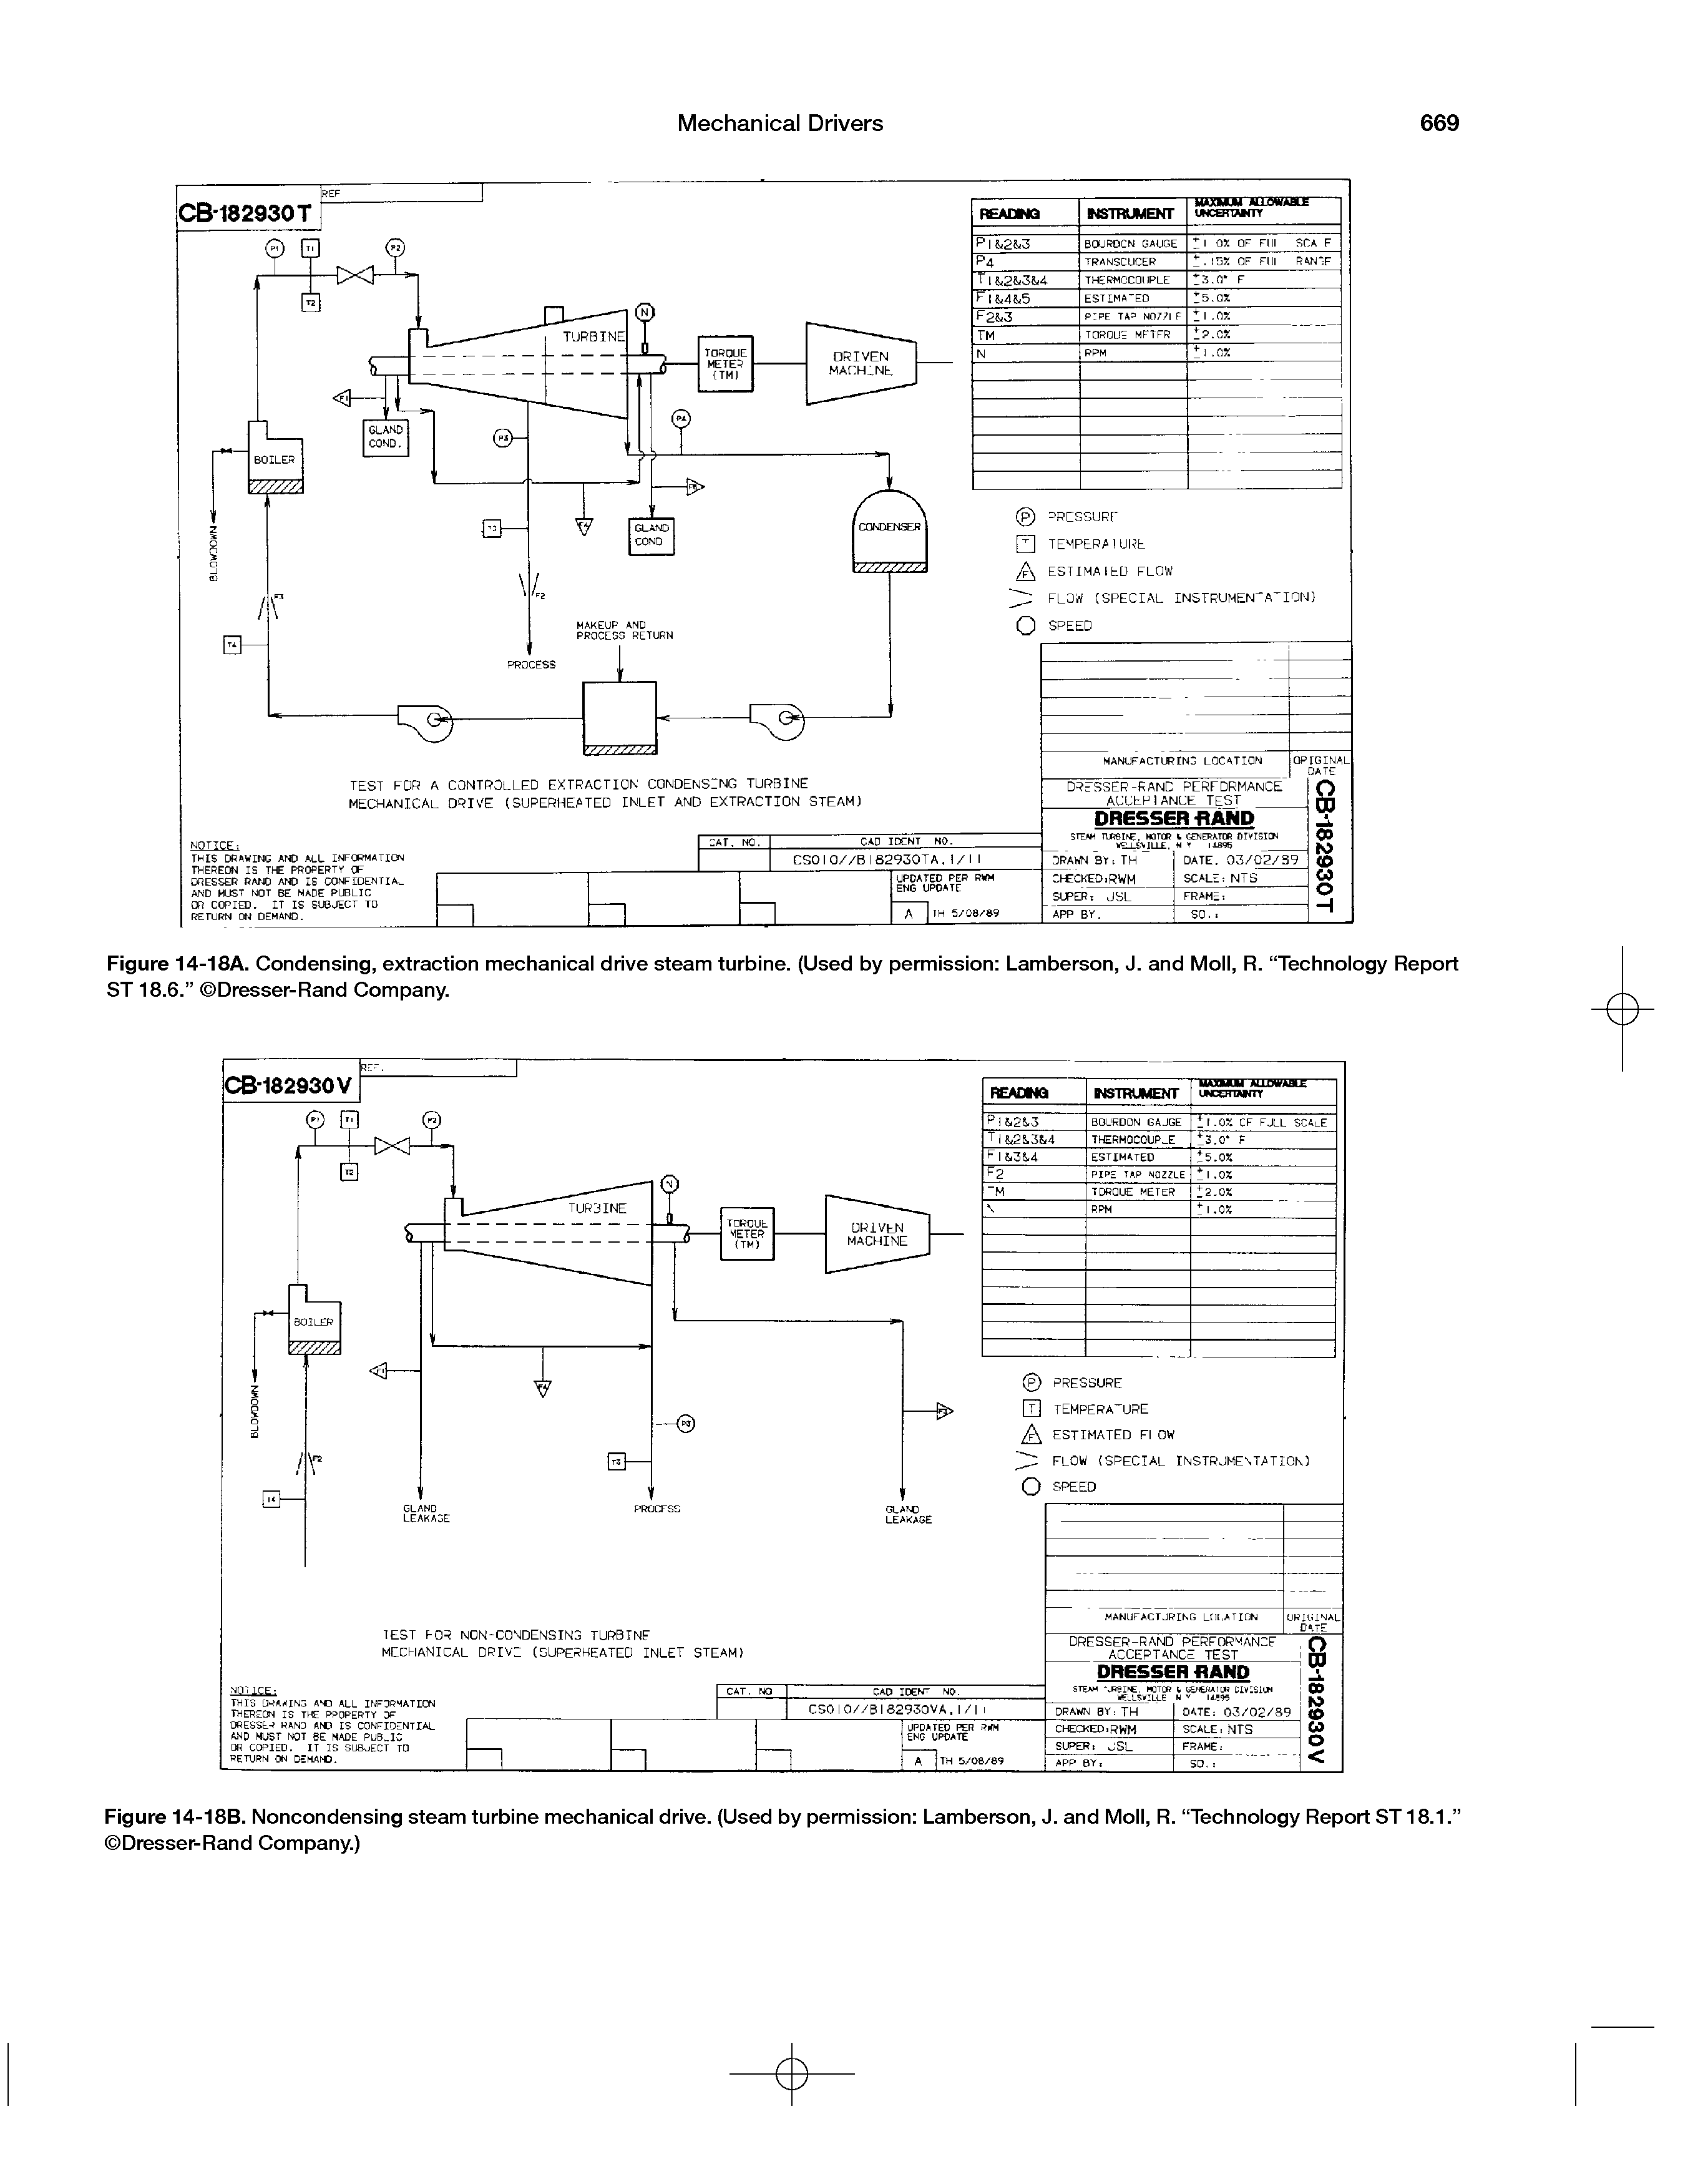 Figure 14-18A. Condensing, extraction mechanical drive steam turbine. (Used by permission Lamberson, J. and Moll, R. Technology Report ST 18.6. Dresser-Rand Company.